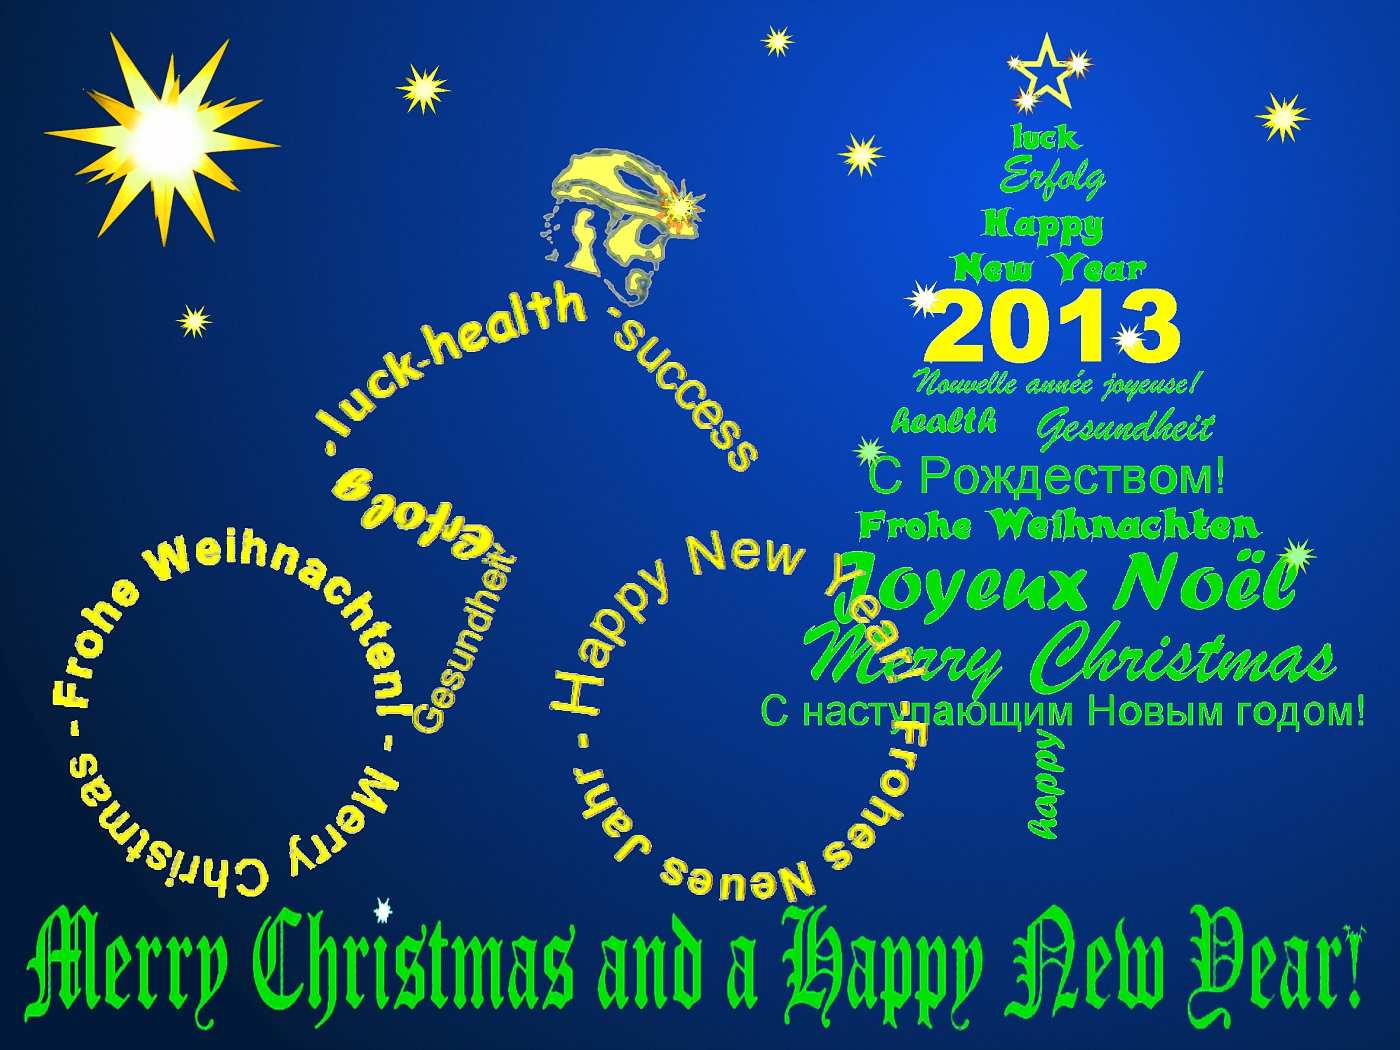 Merry Christmas and a Happy New Year 2013!